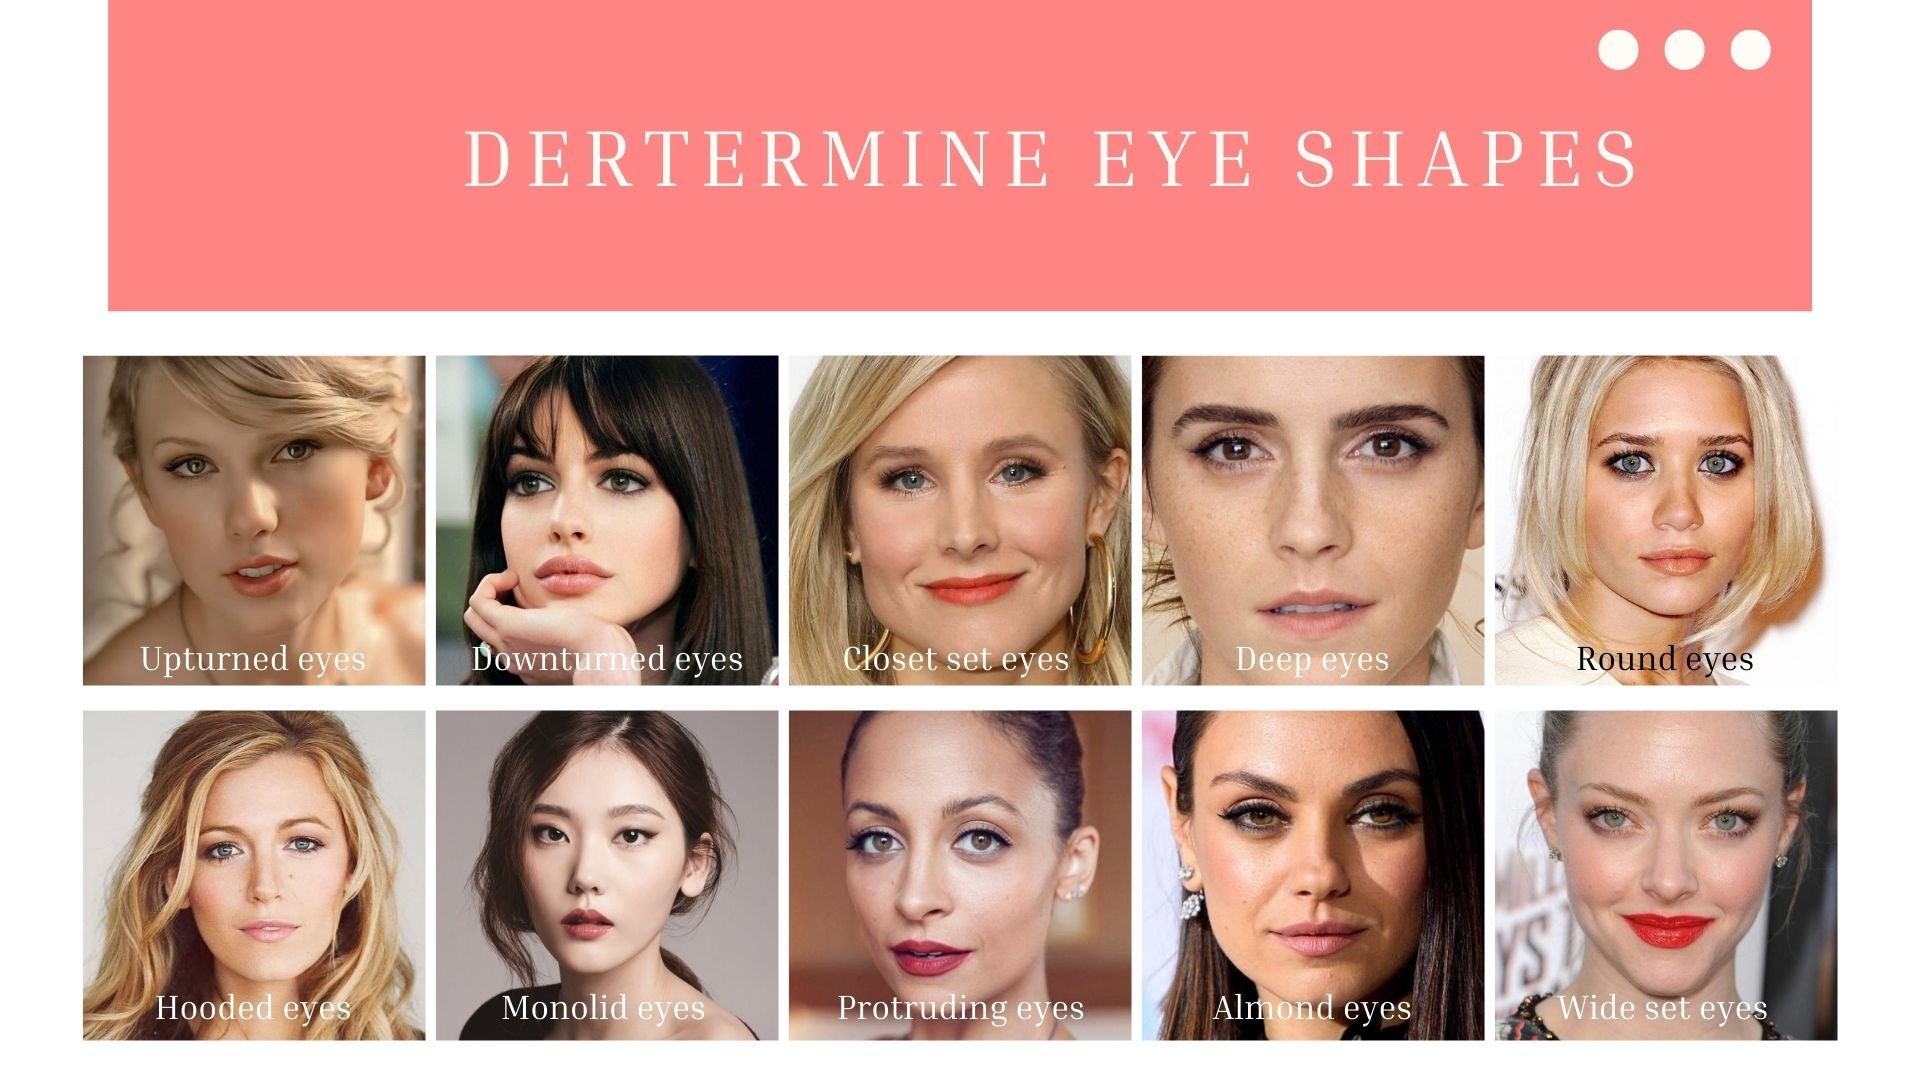 The charm of different eye shapes varies among individuals